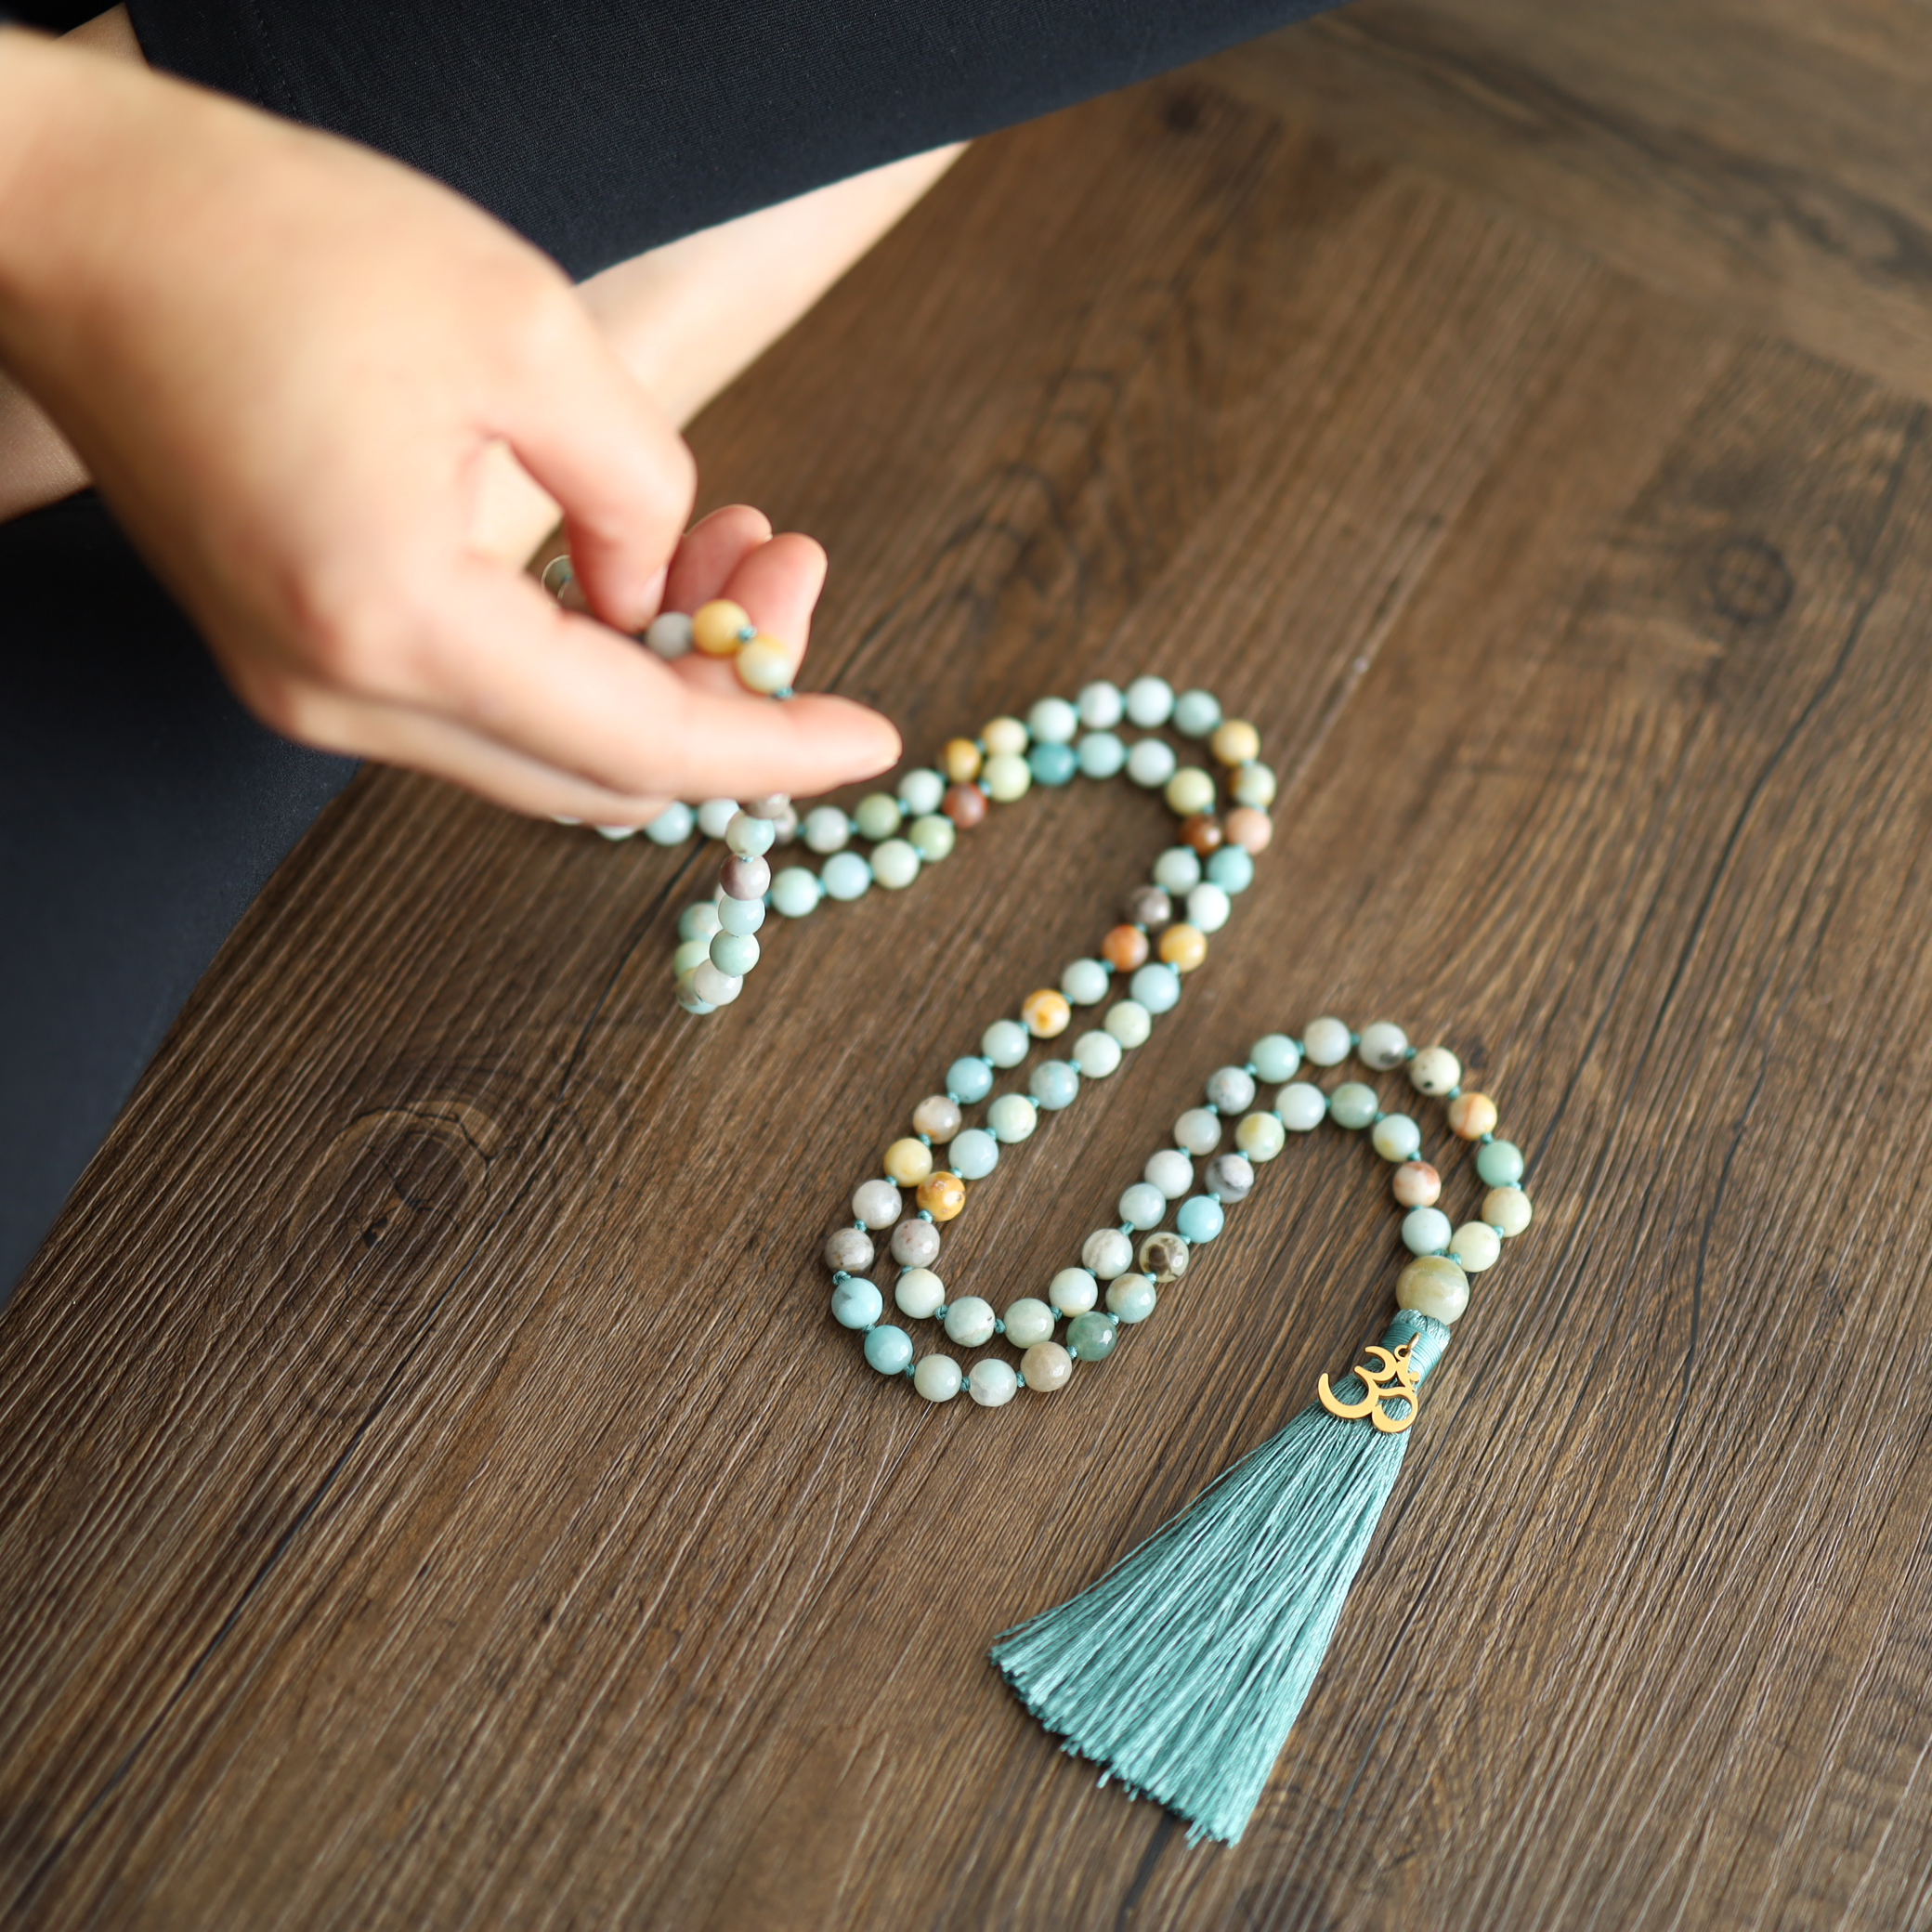 Details about   8mm Knotted Amazonite Beads Handmade Tassel Necklace Spirituality Mala Classic 